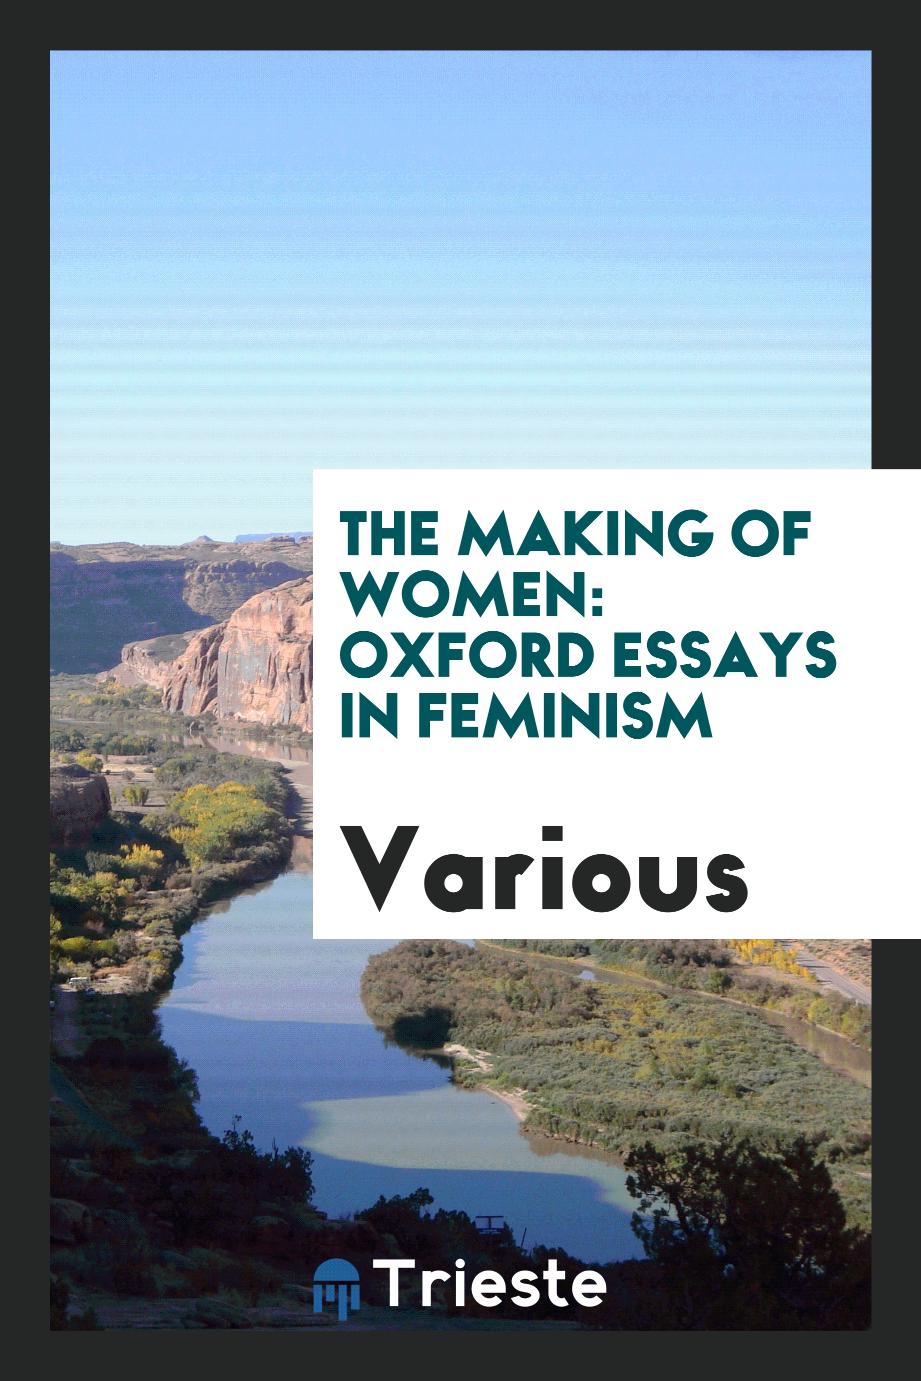 The making of women: Oxford essays in feminism